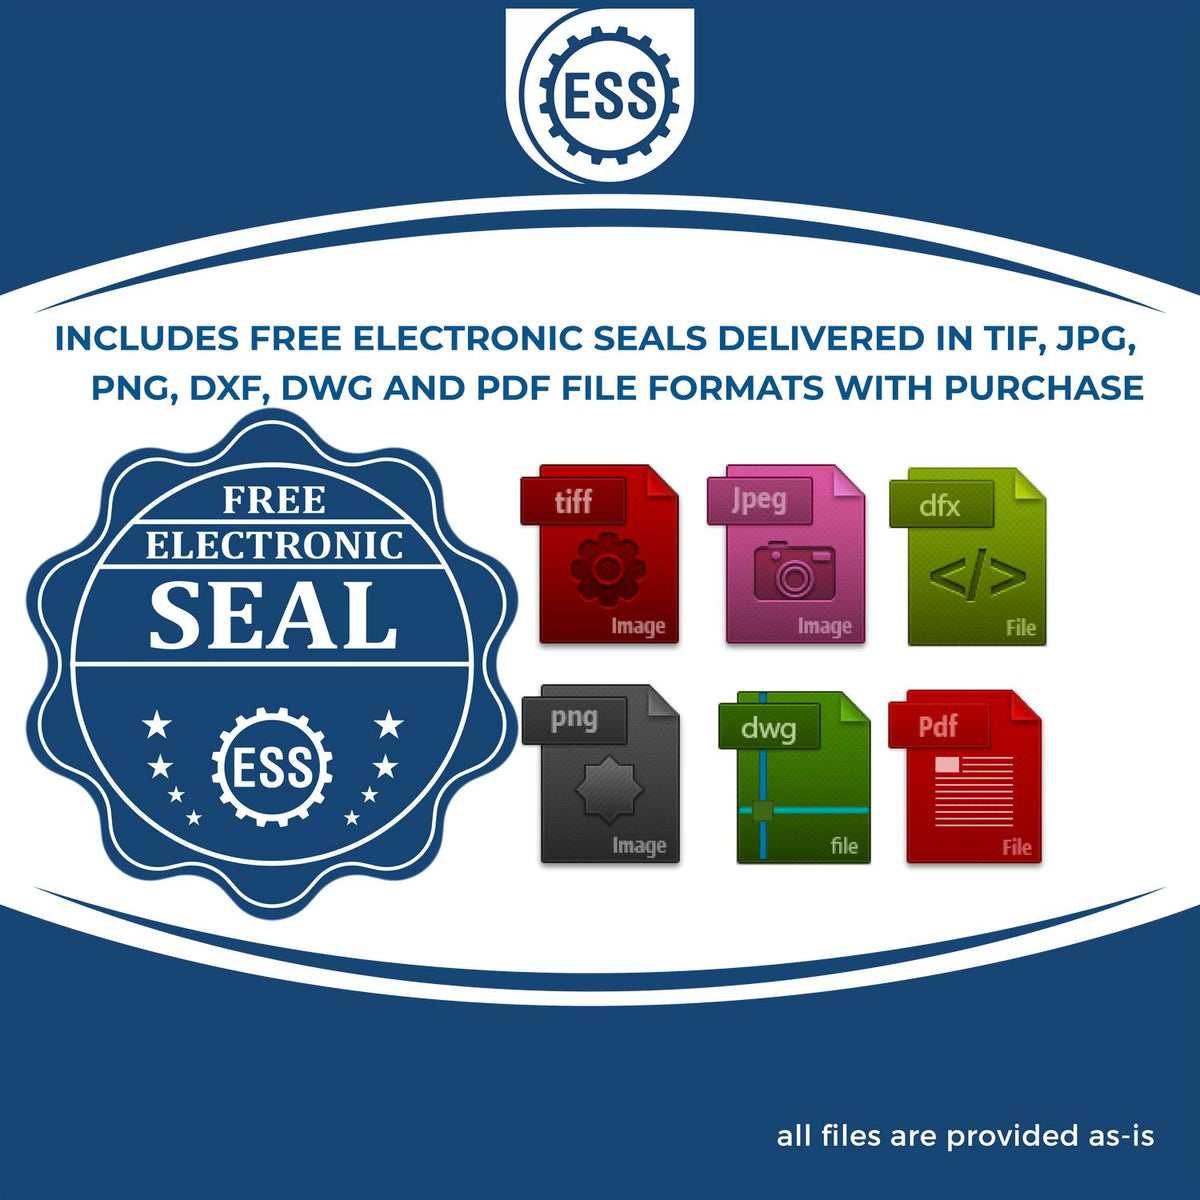 An infographic for the free electronic seal for the Heavy Duty Cast Iron West Virginia Engineer Seal Embosser illustrating the different file type icons such as DXF, DWG, TIF, JPG and PNG.